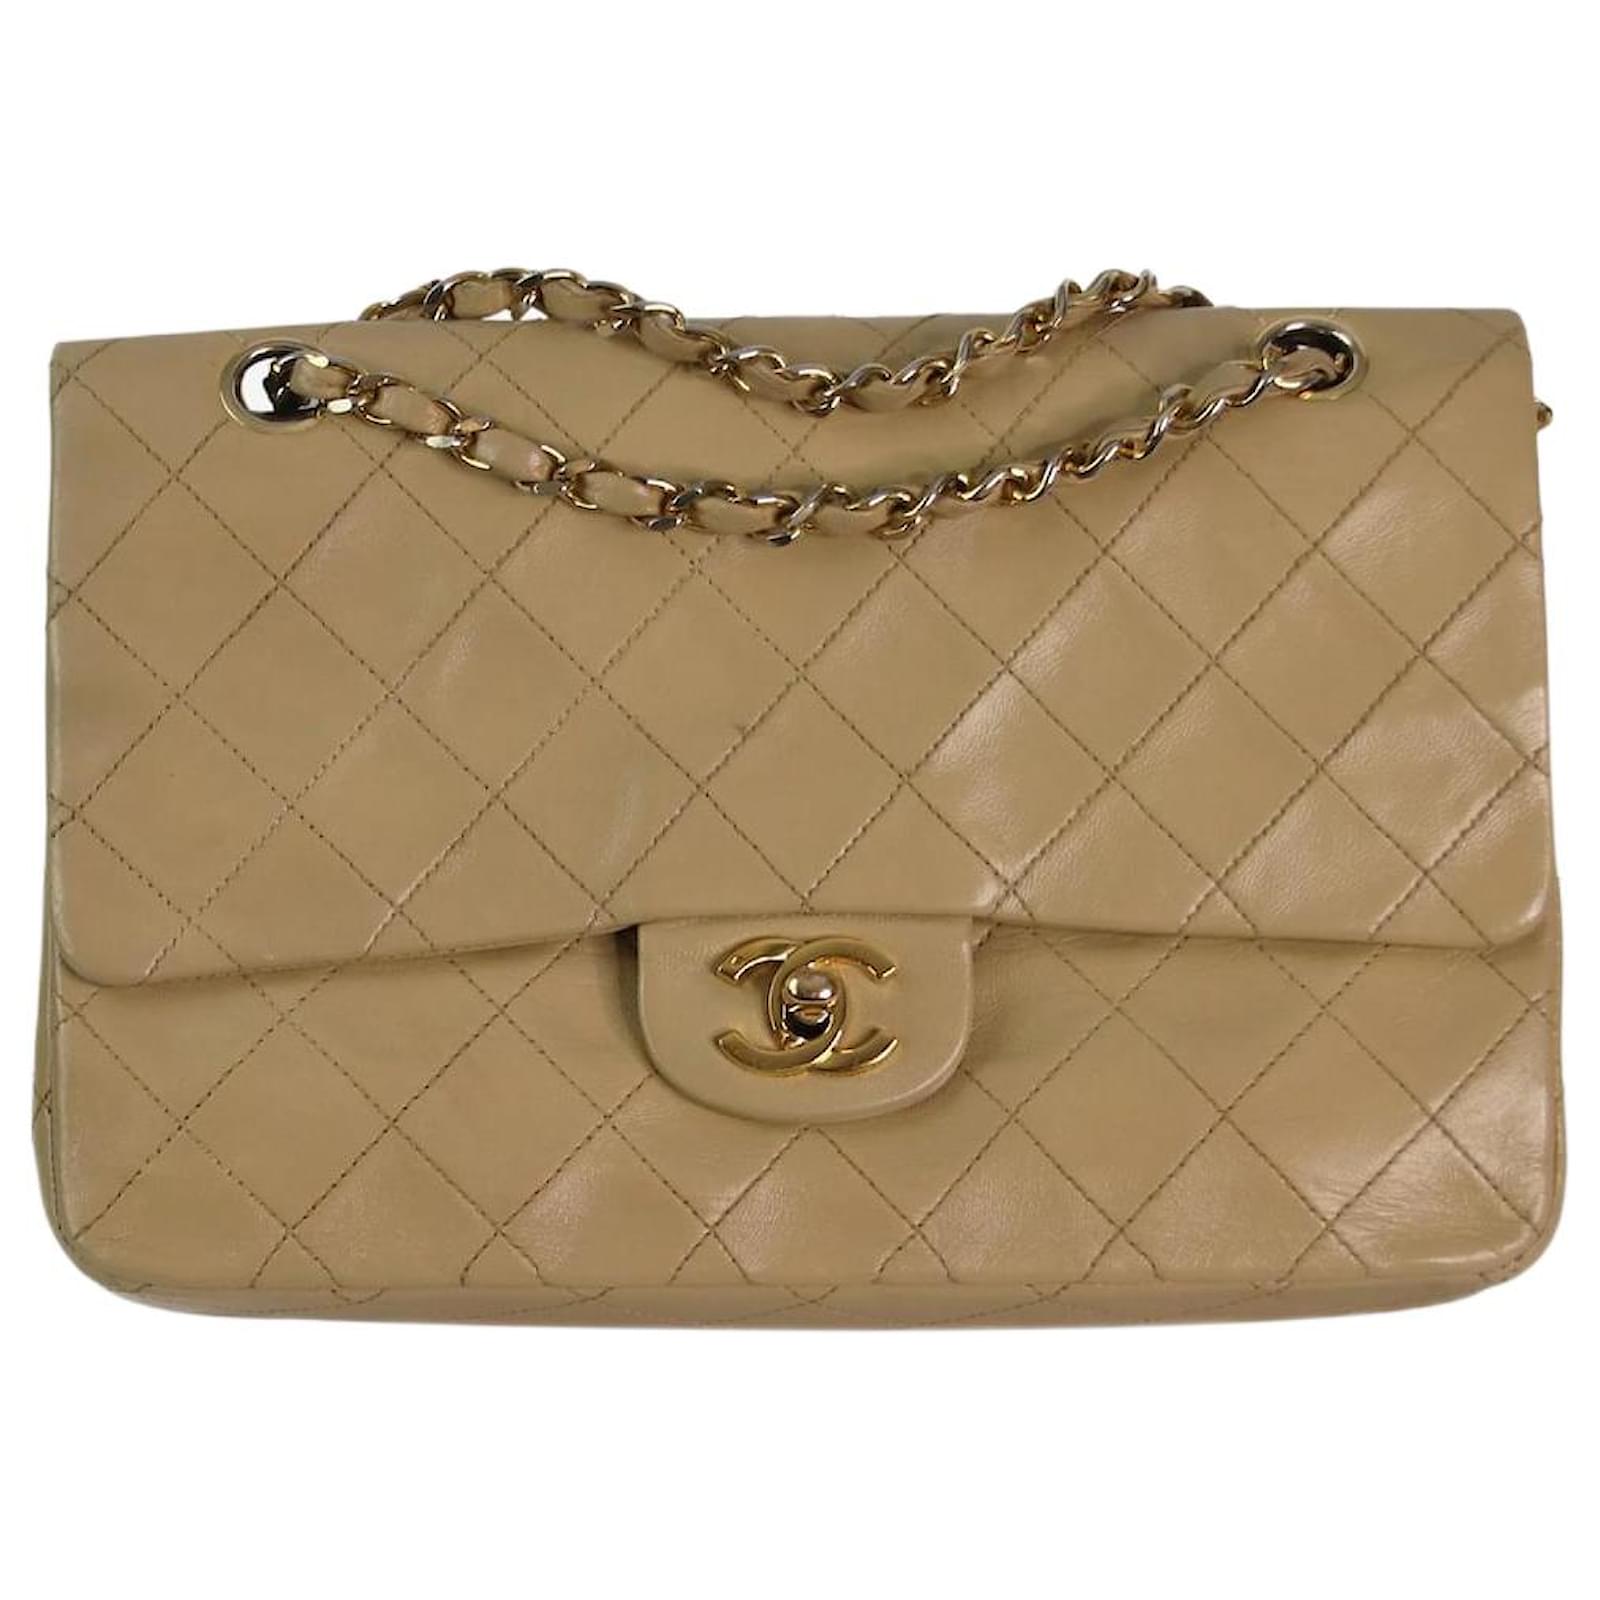 Chanel Pre Owned 1985-1993 Diamond Quilted Flap Shoulder Bag - ShopStyle